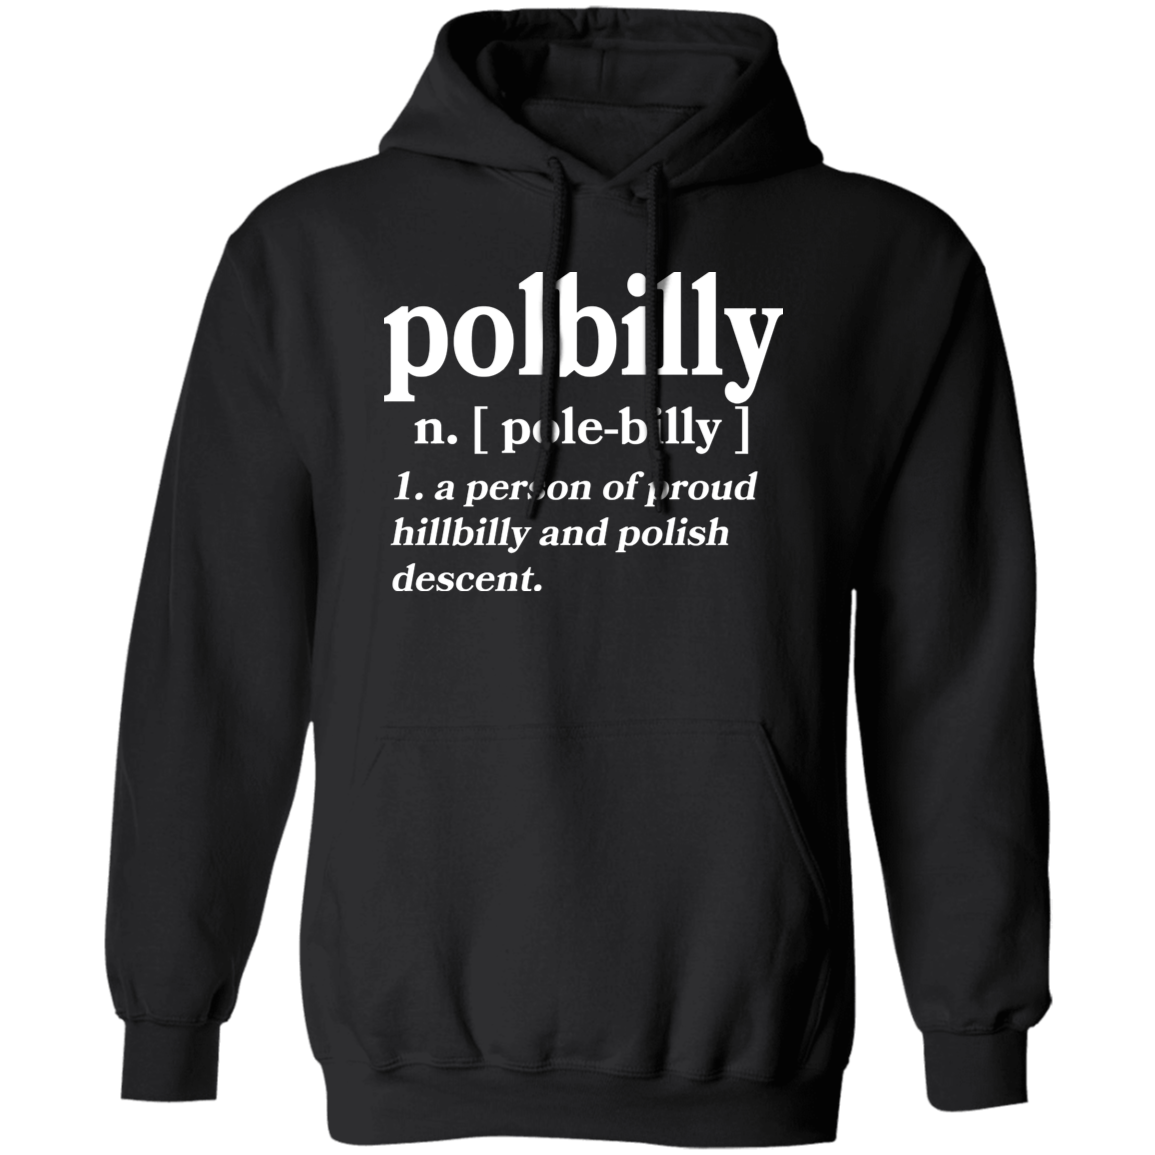 PolBIlly A Person Of Hillbilly And Polish Descent Apparel CustomCat G185 Pullover Hoodie Black S